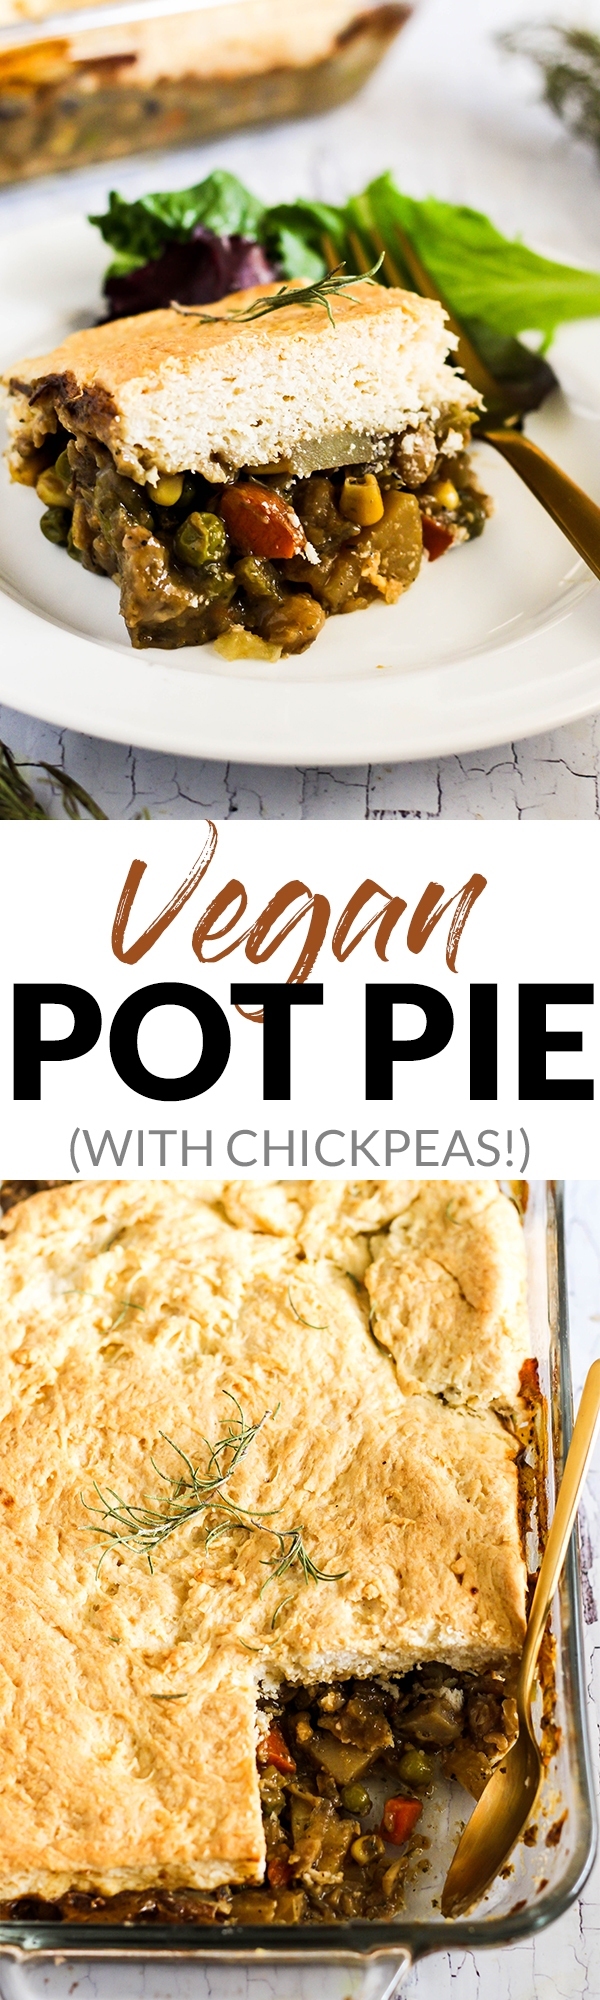 This Vegan Pot Pie will be a hit with everyone at the dinner table! It's full of chickpeas and vegetables with a fluffy biscuit topping. Made from plants!